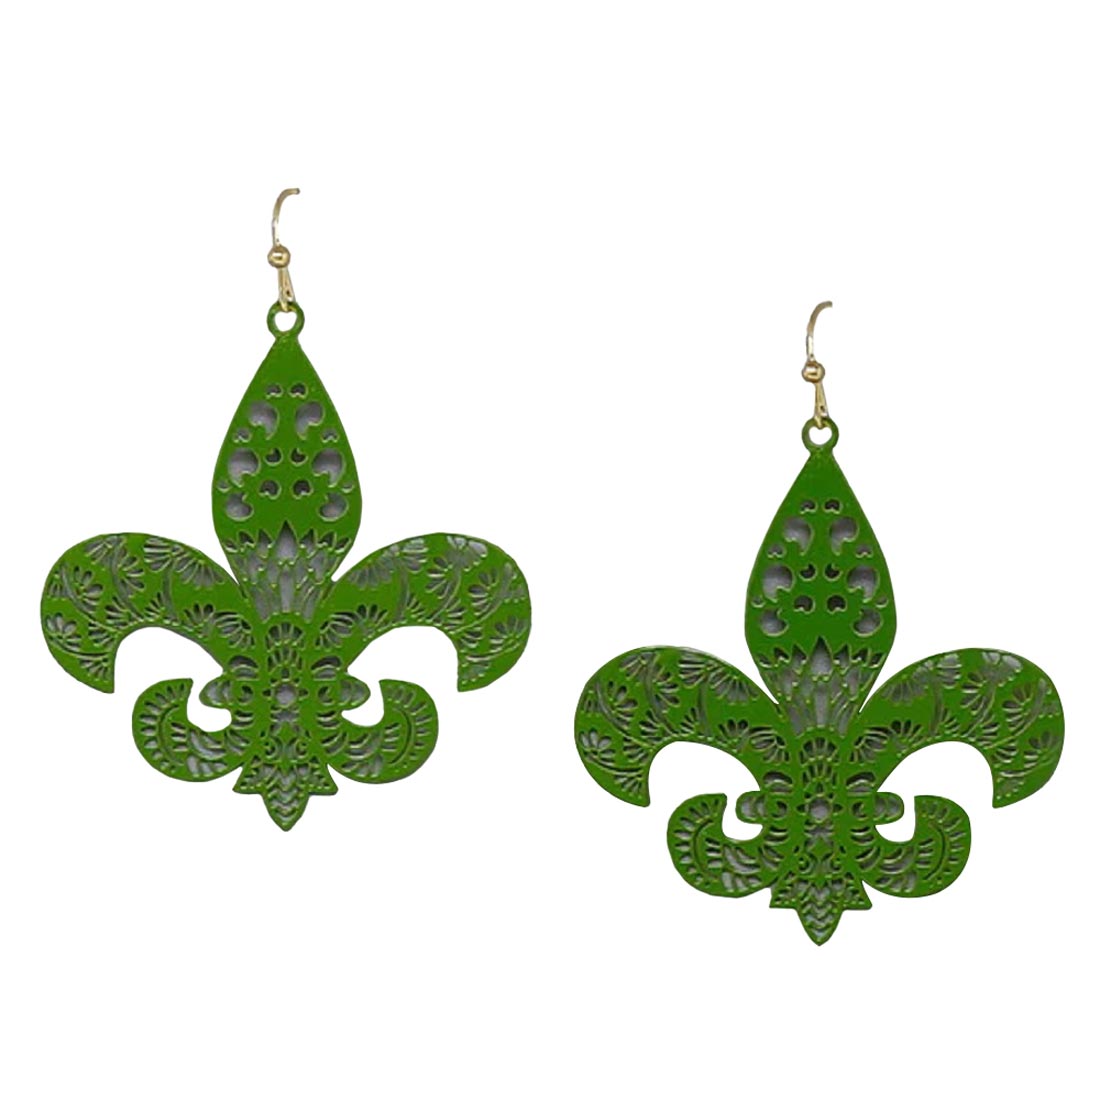 Green Fleur De Lis Lightweight Filigree Earrings, turn your ears into a chic fashion statement with these Fleur De Lis filigree earrings! Put on a pop of color to complete your ensemble stylishly with these Fleur de Lis-themed earrings. Highlight your appearance and grasp everyone's eye at any place. 